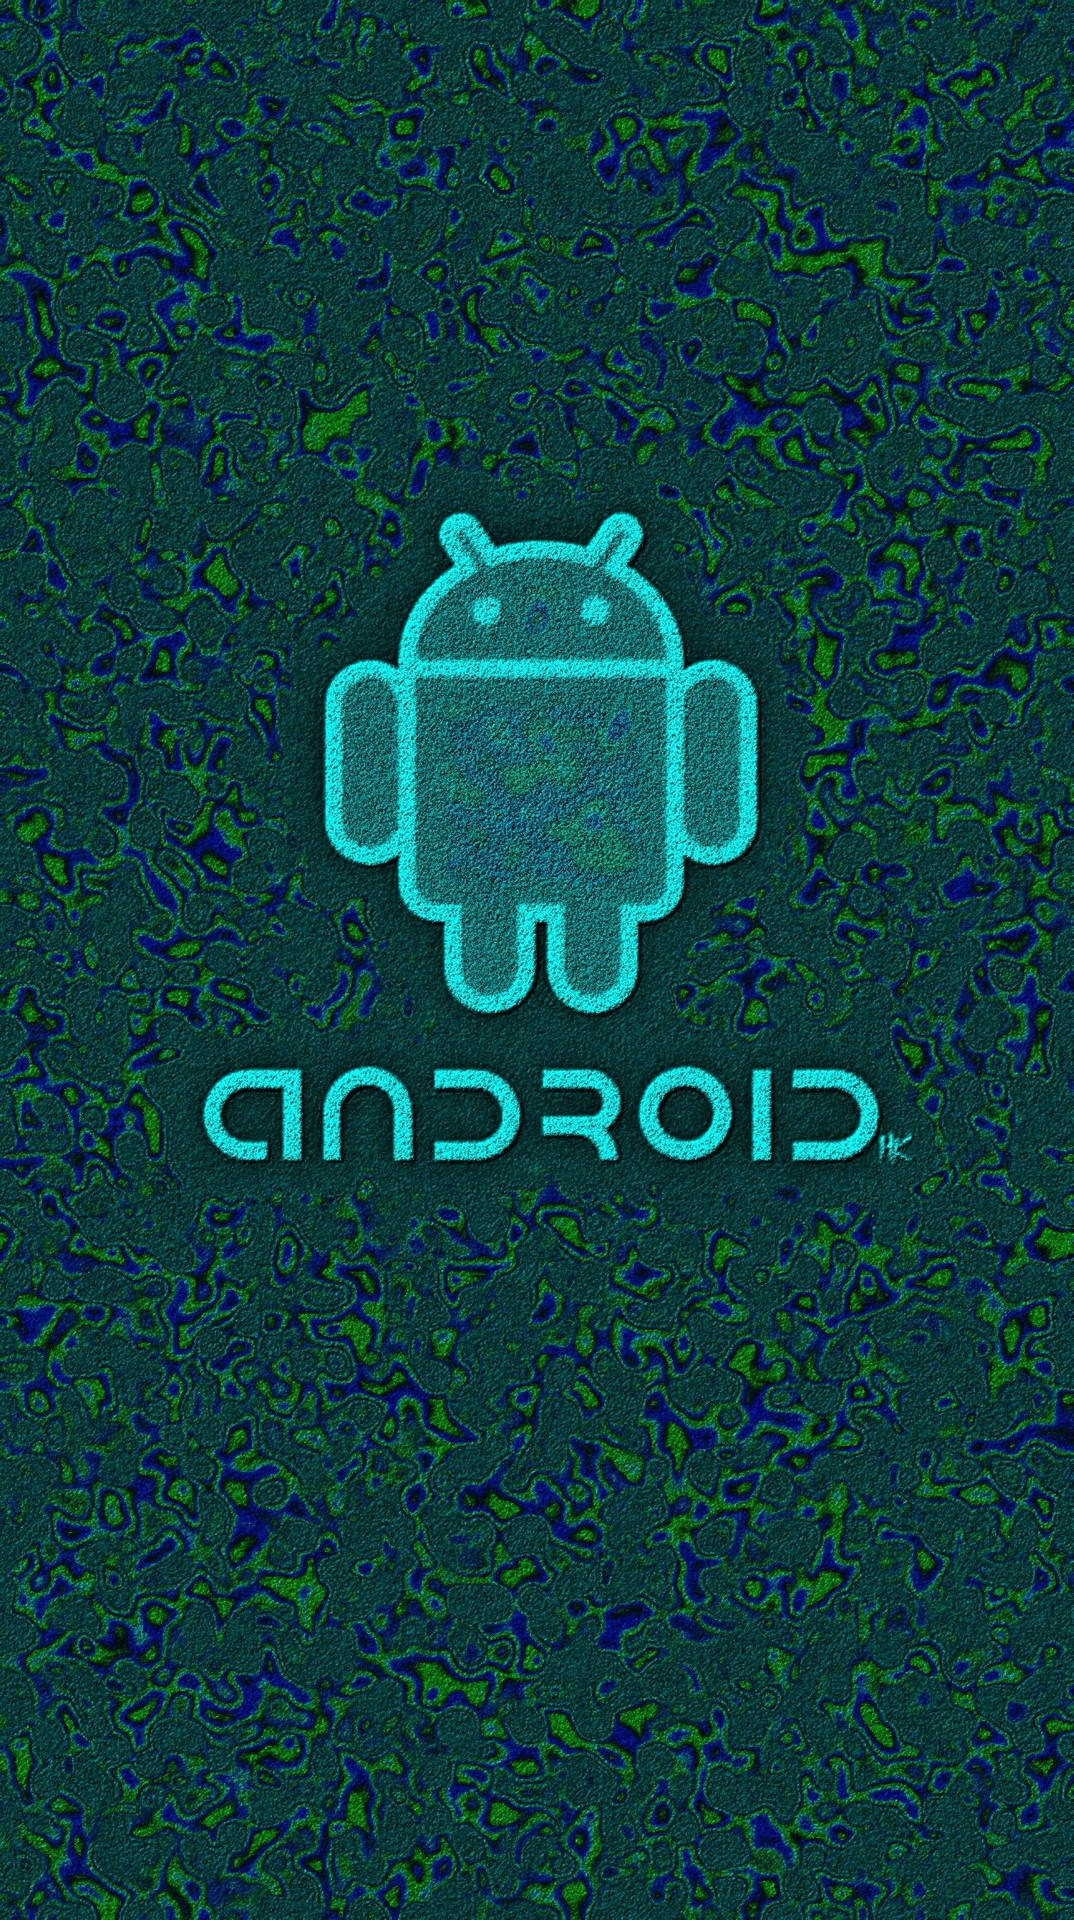 Android 10 logo wallpaper by mholloway9856 - Download on ZEDGE™ | 8e47 | Android  wallpaper, Logo wallpaper hd, Apple logo wallpaper iphone